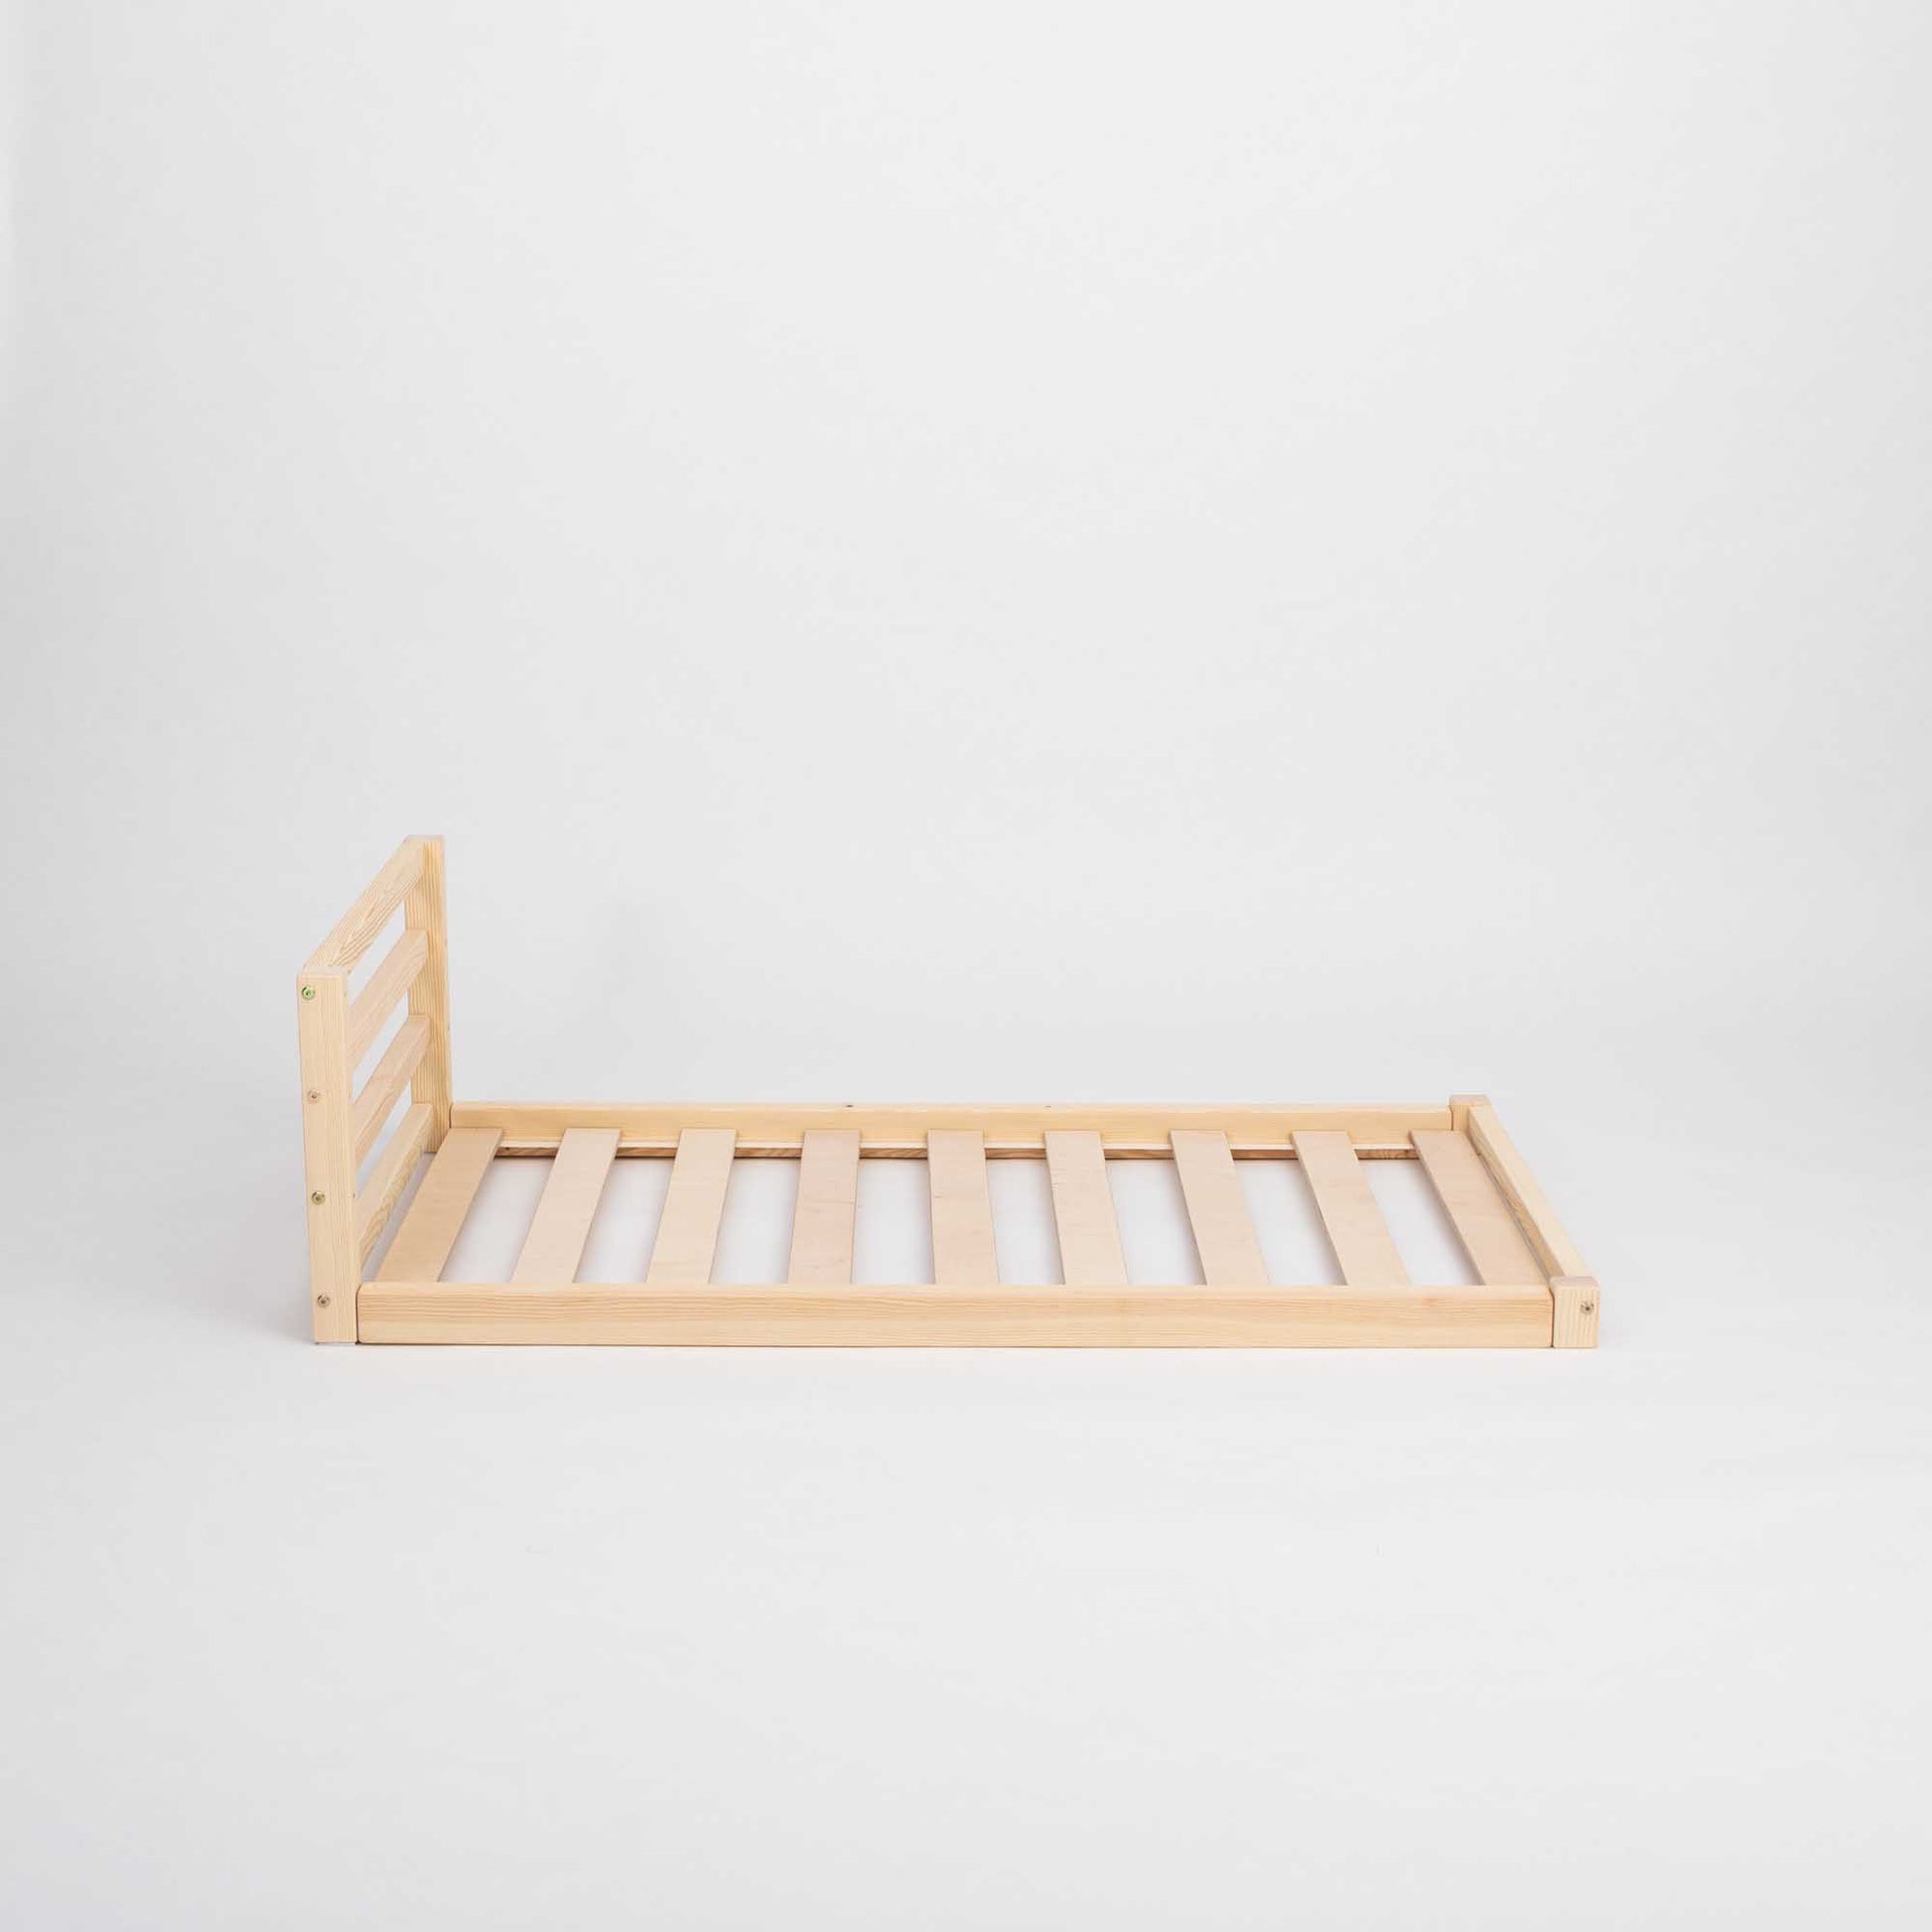 A Sweet Home From Wood solid pine wooden Toddler floor bed with a horizontal rail headboard, with slats on a white background, suitable for children's independent sleeping.